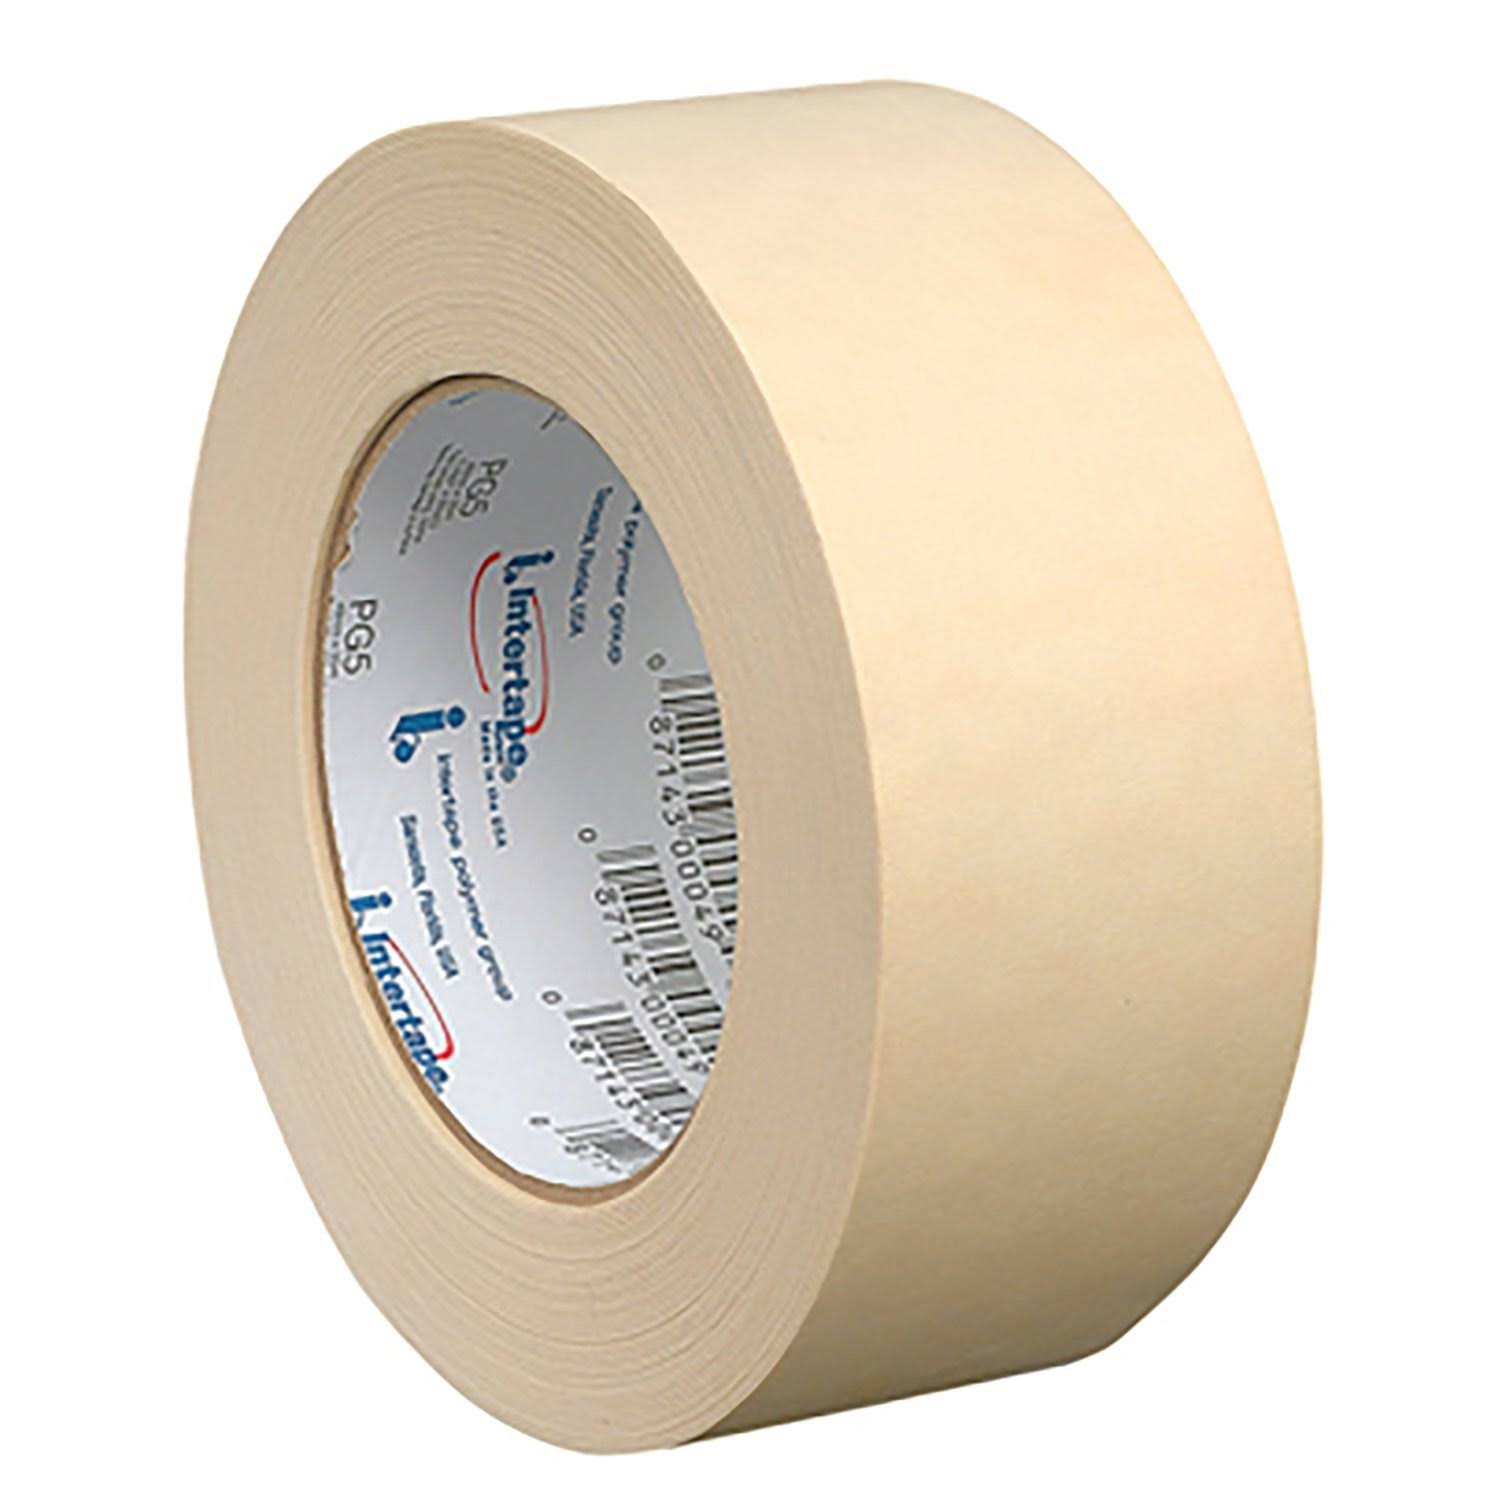 Intertape Polymer 4110870 Painters Masking Tape - 1.88 in. x 60 Yards